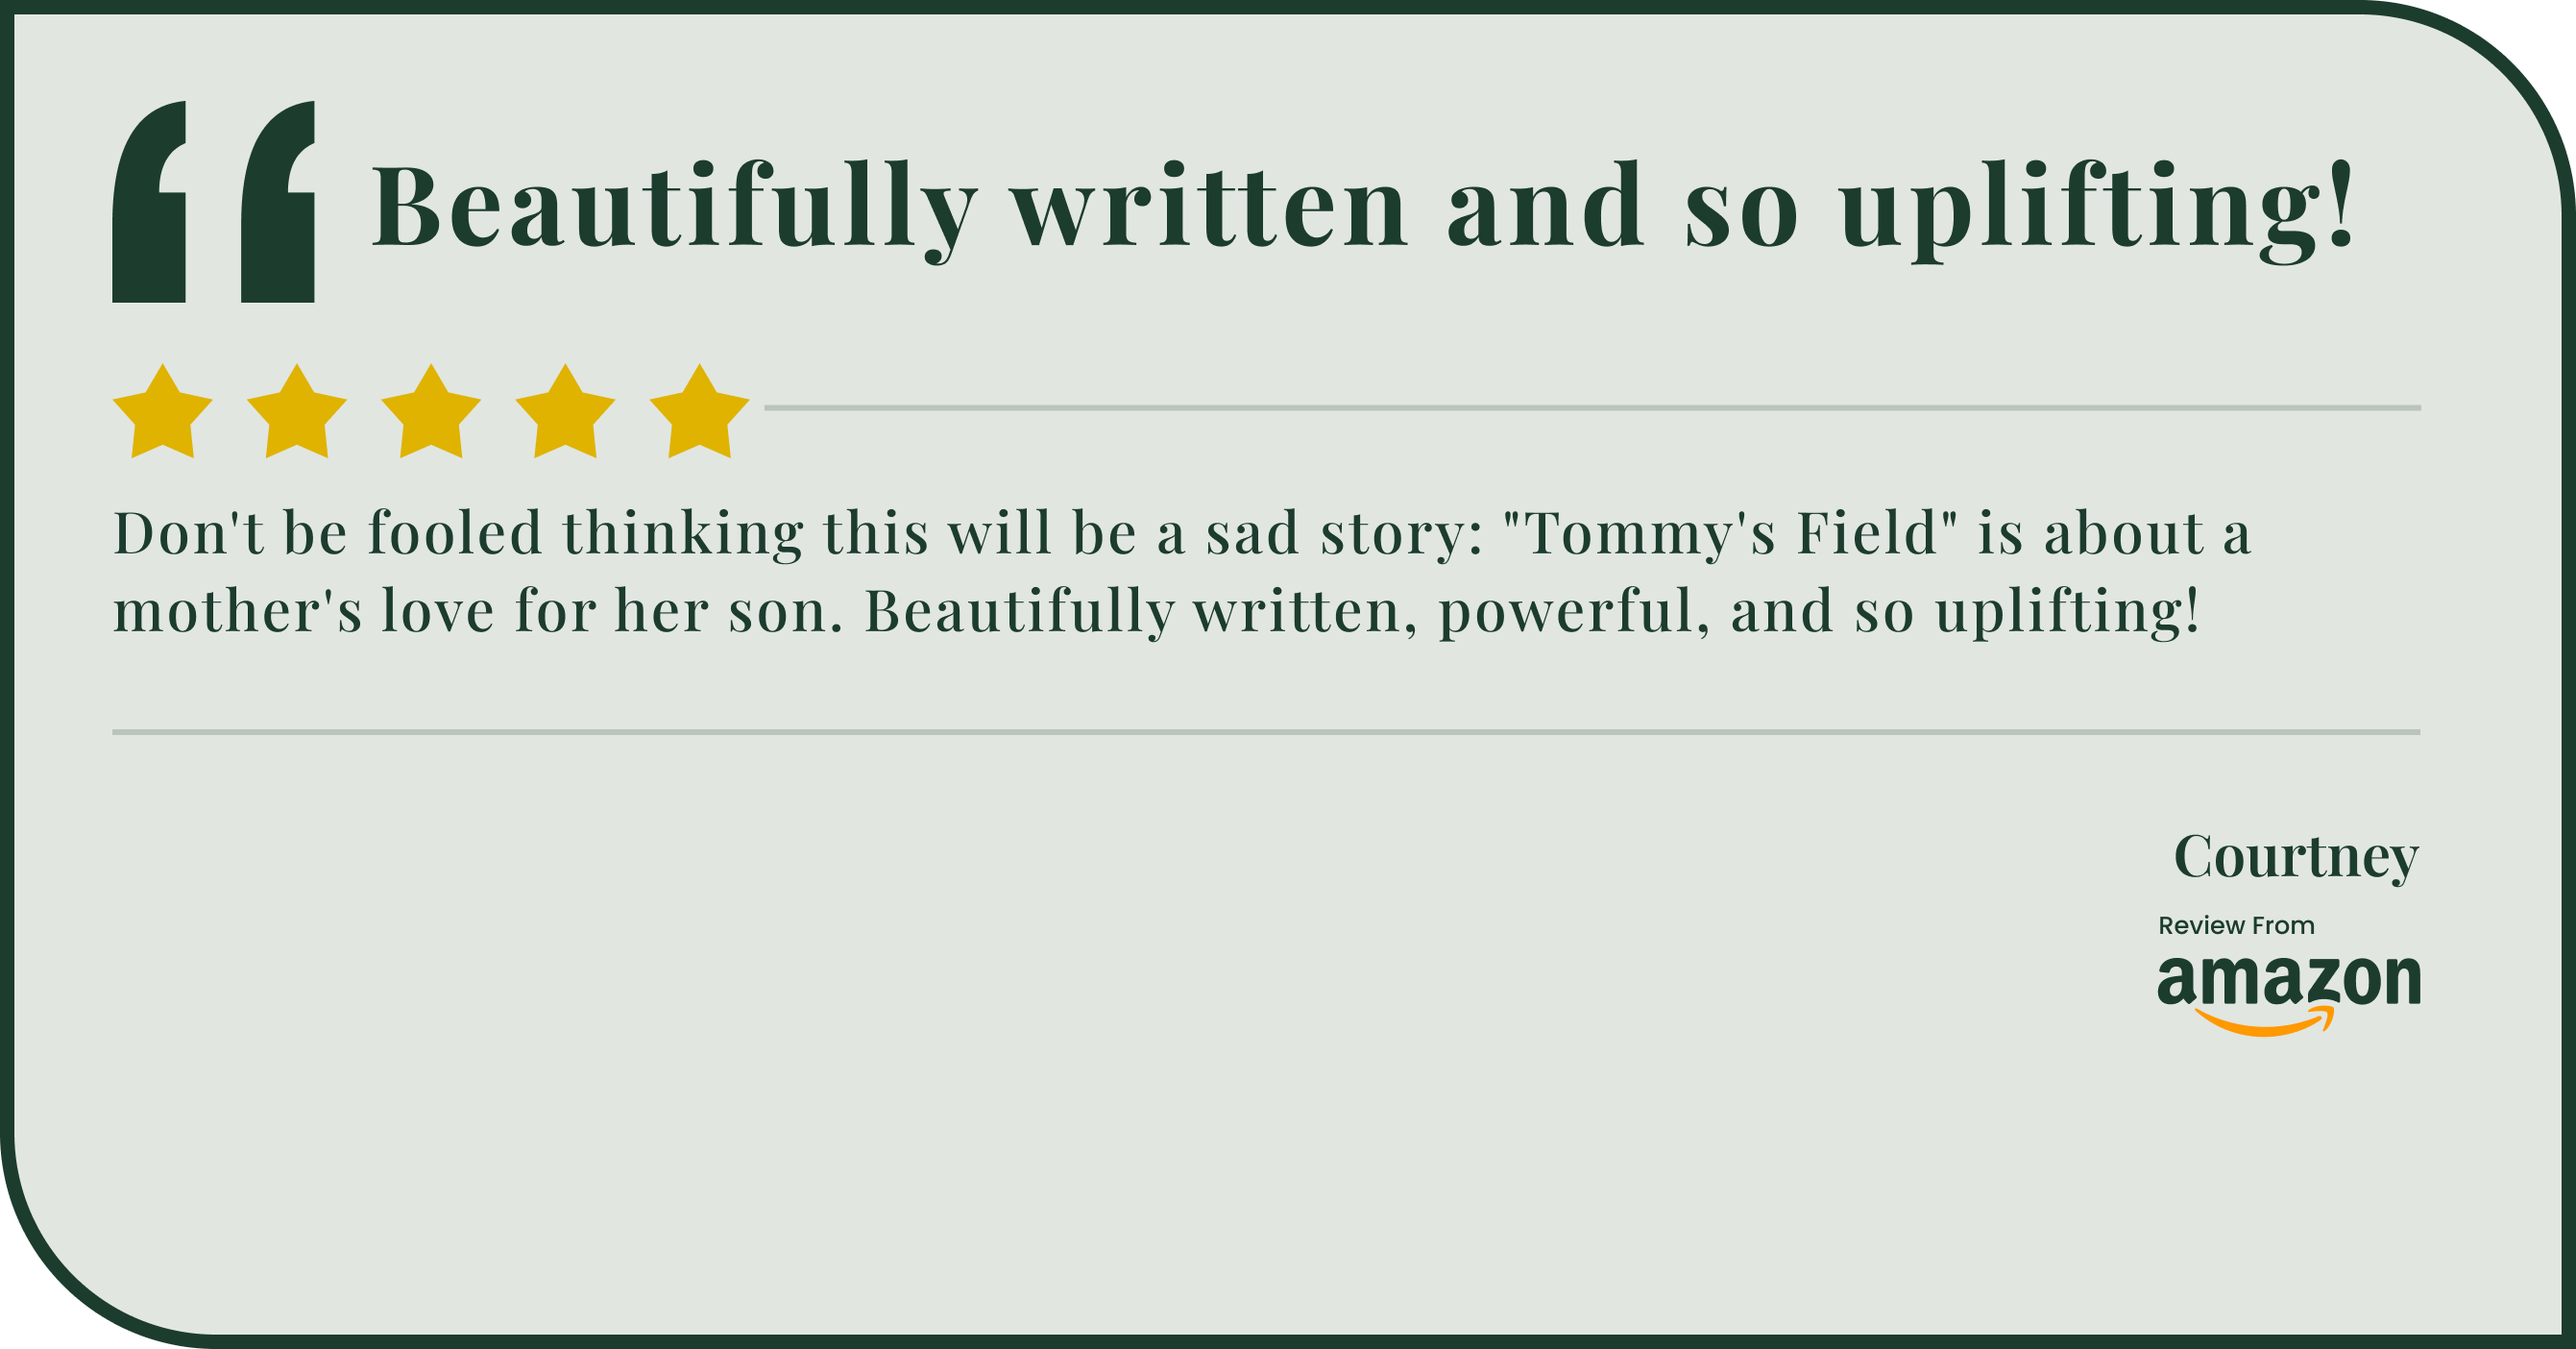 Five-star review for "Tommy's Field" book, praising storytelling.